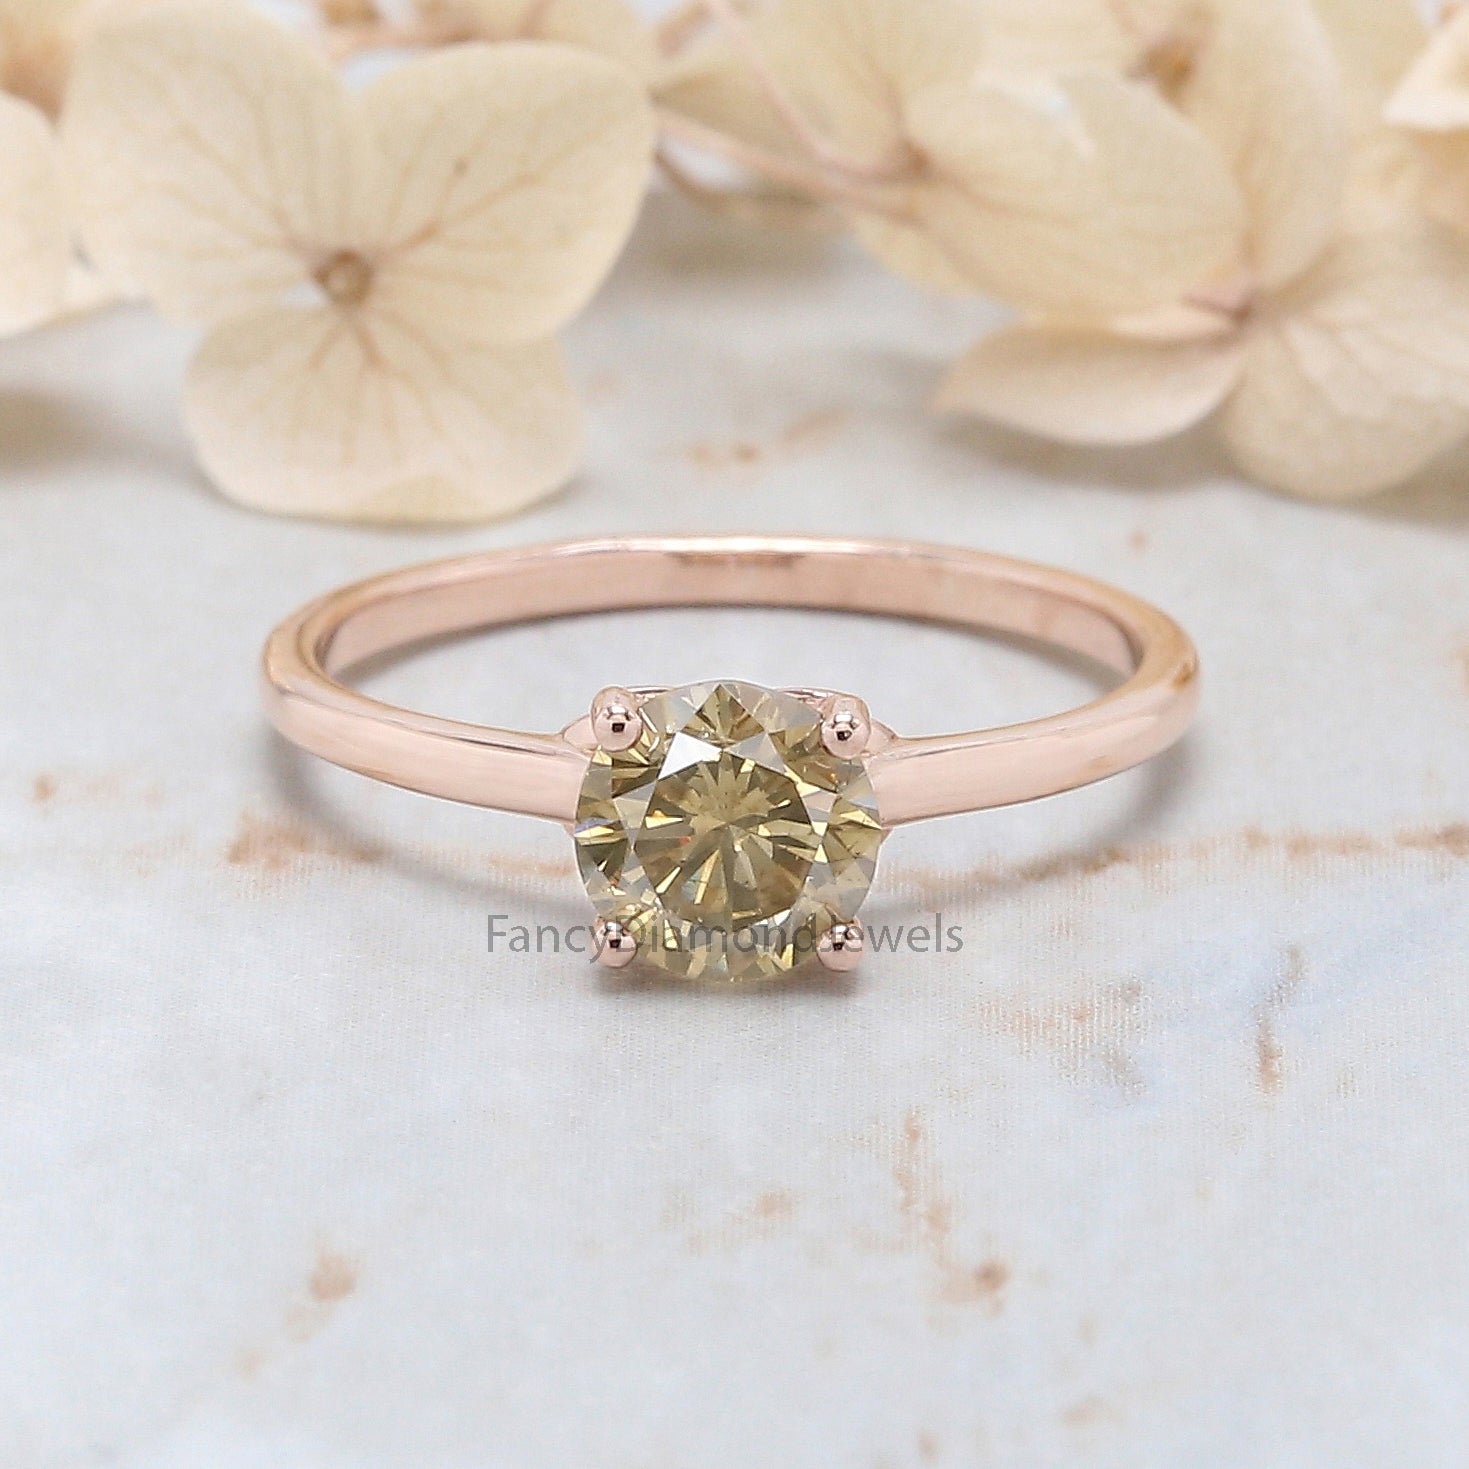 Round Cut Yellow Color Diamond Ring 0.88 Ct 6.00 MM Round Shape Diamond Ring 14K Solid Rose Gold Silver Engagement Ring Gift For Her QL3061